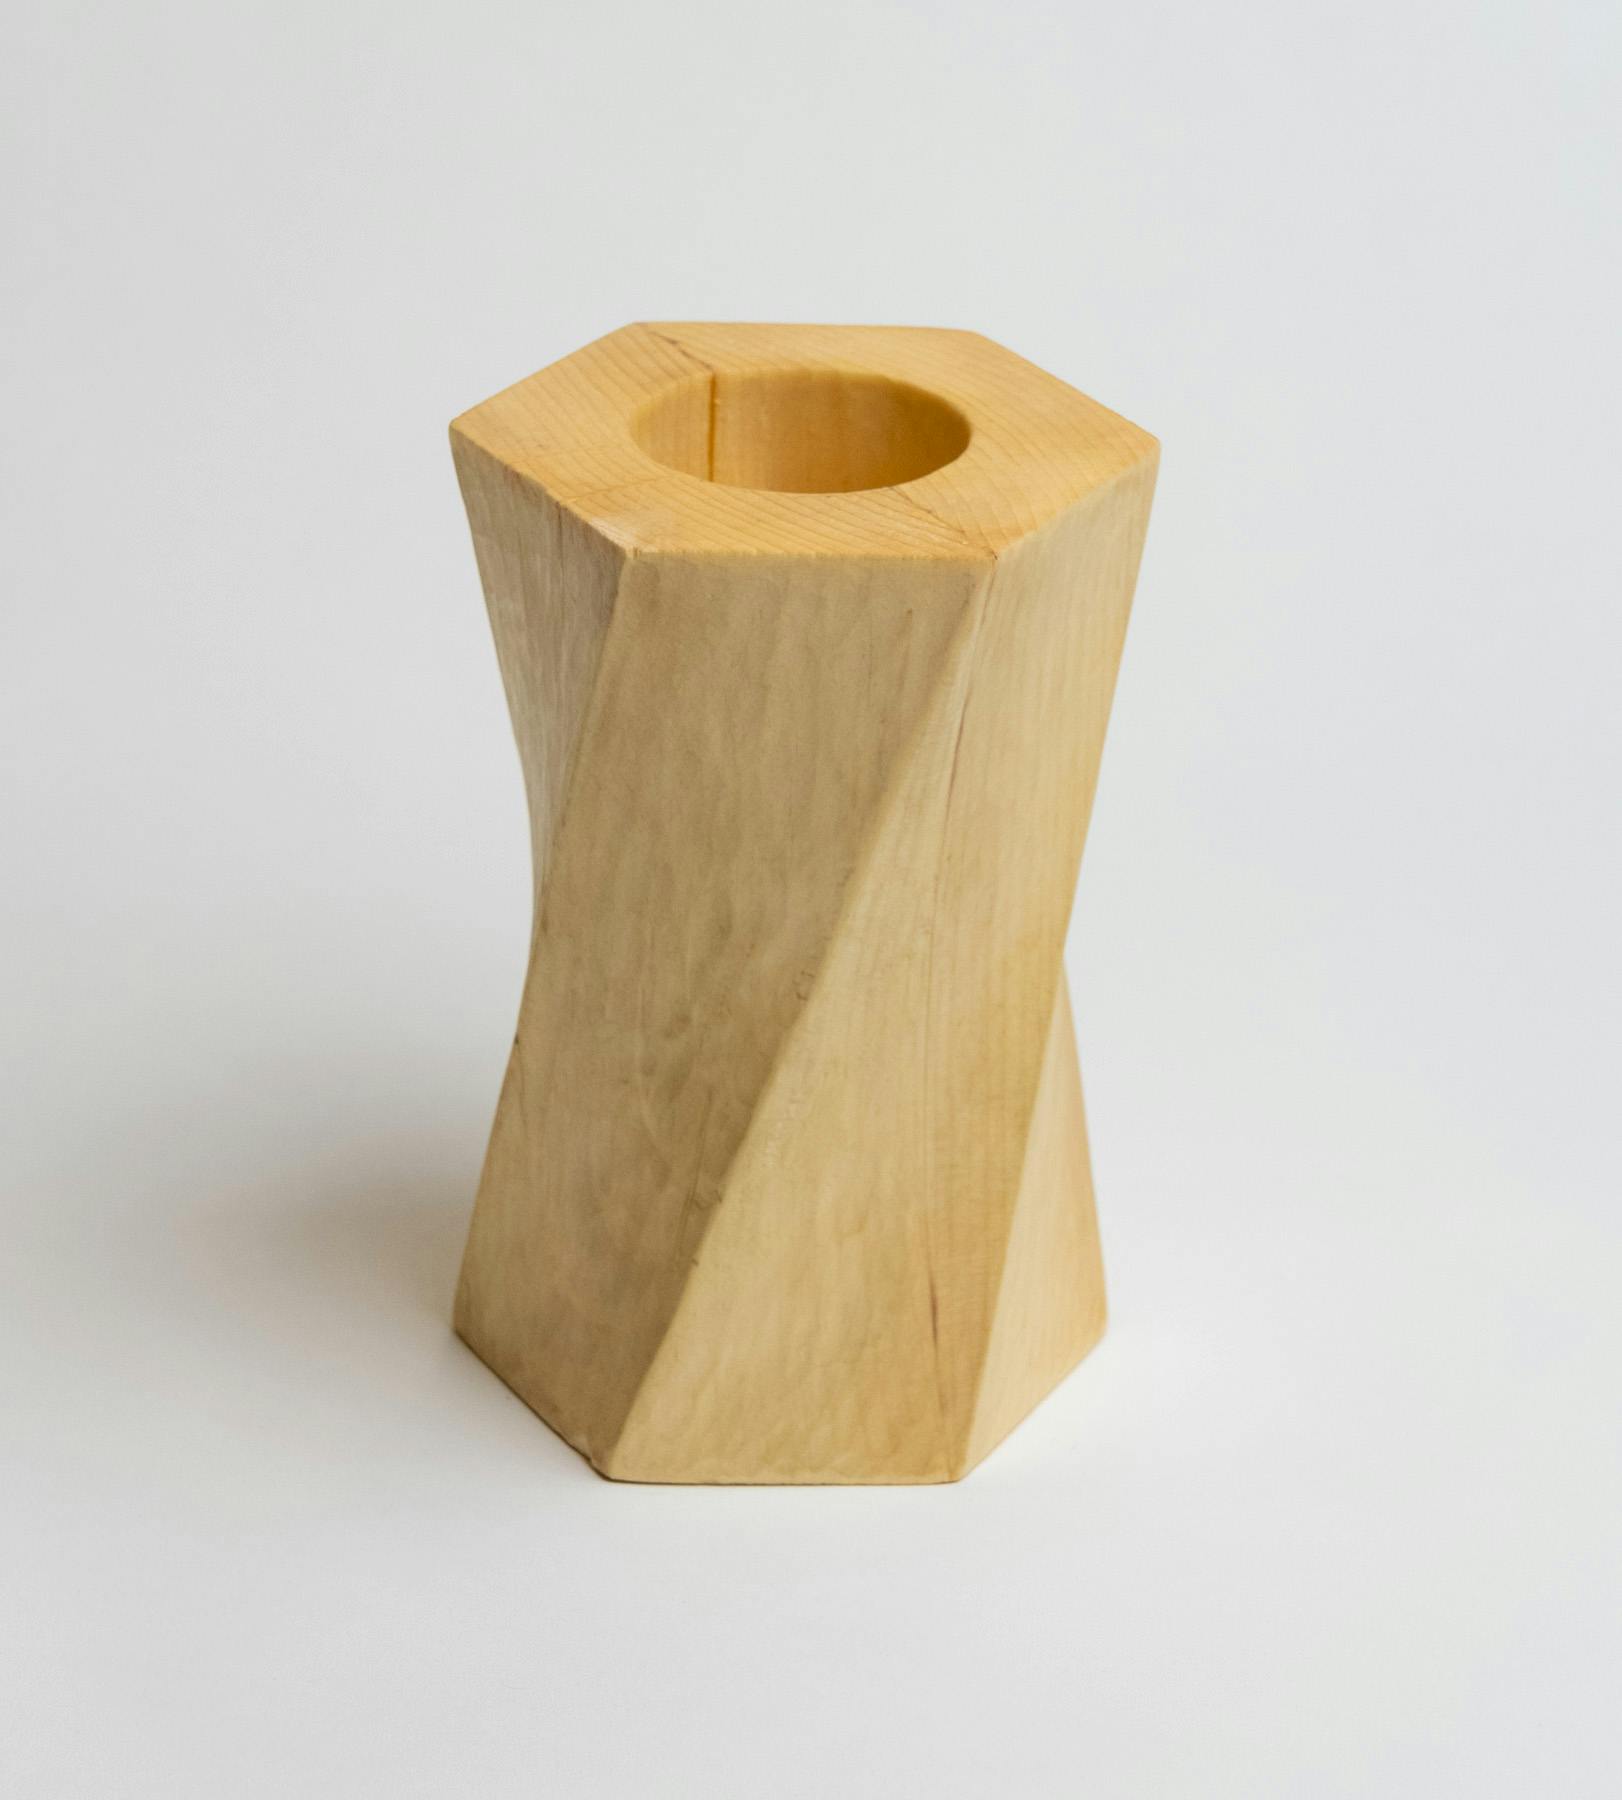 A twisted hexagonal prism made of pine wood with a deep cavity at the top.